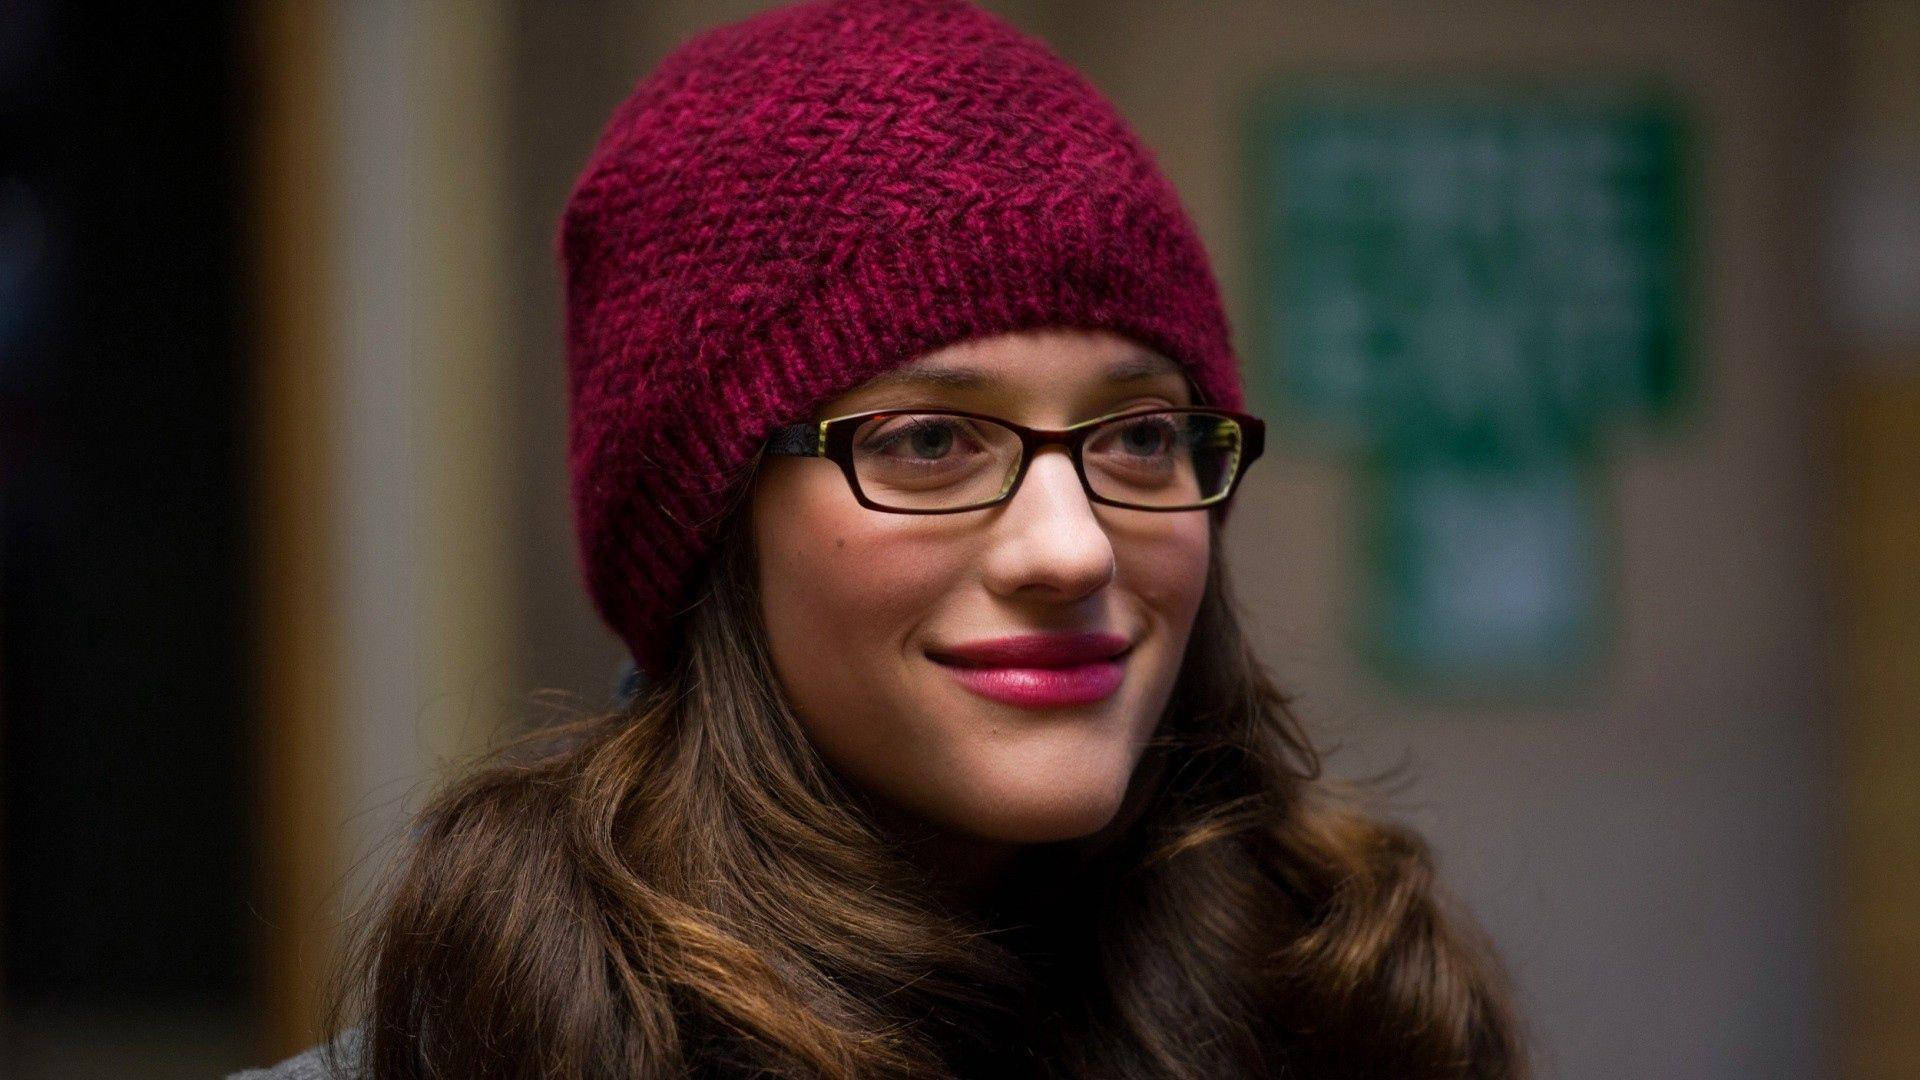 Actress Kat Dennings As Darcy Lewis In Thor Background